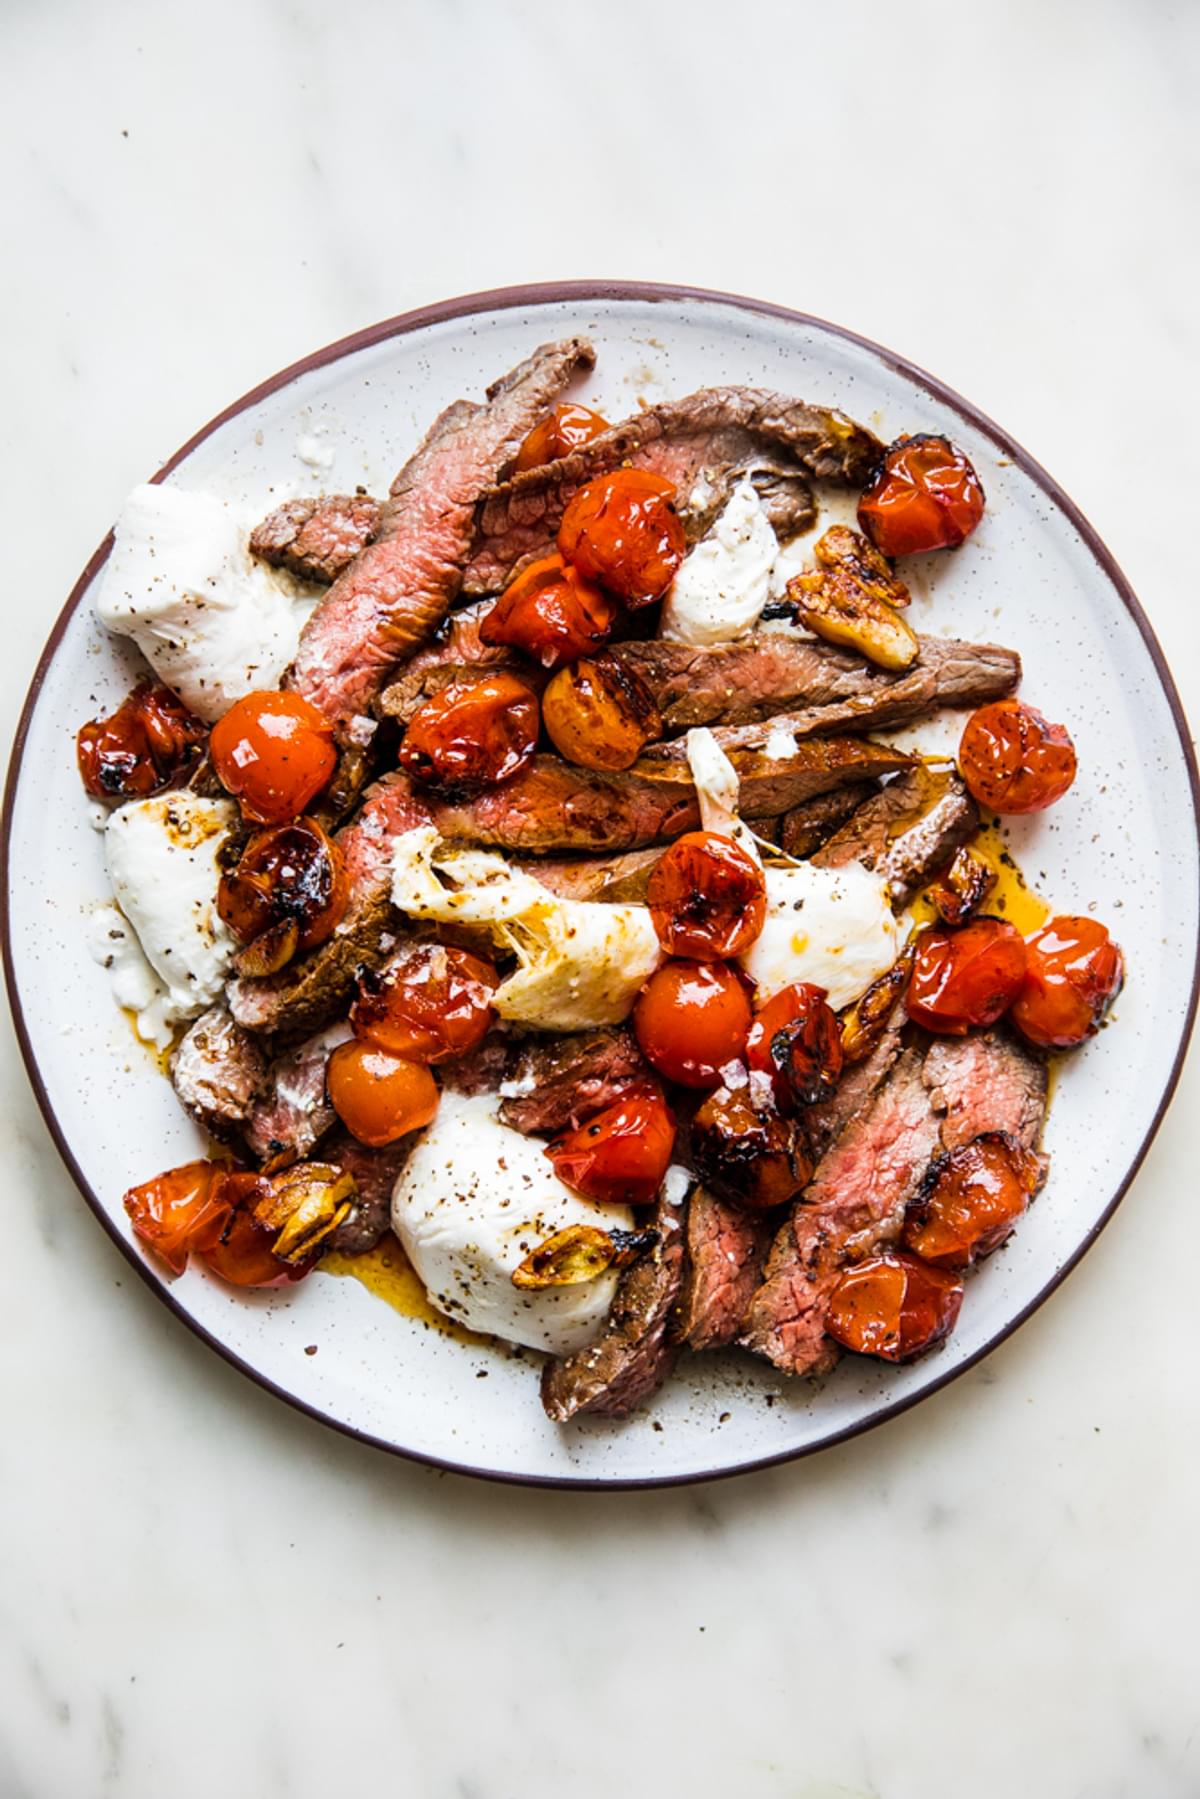 Grilled Skirt Steak with Blistered Tomatoes and burrata